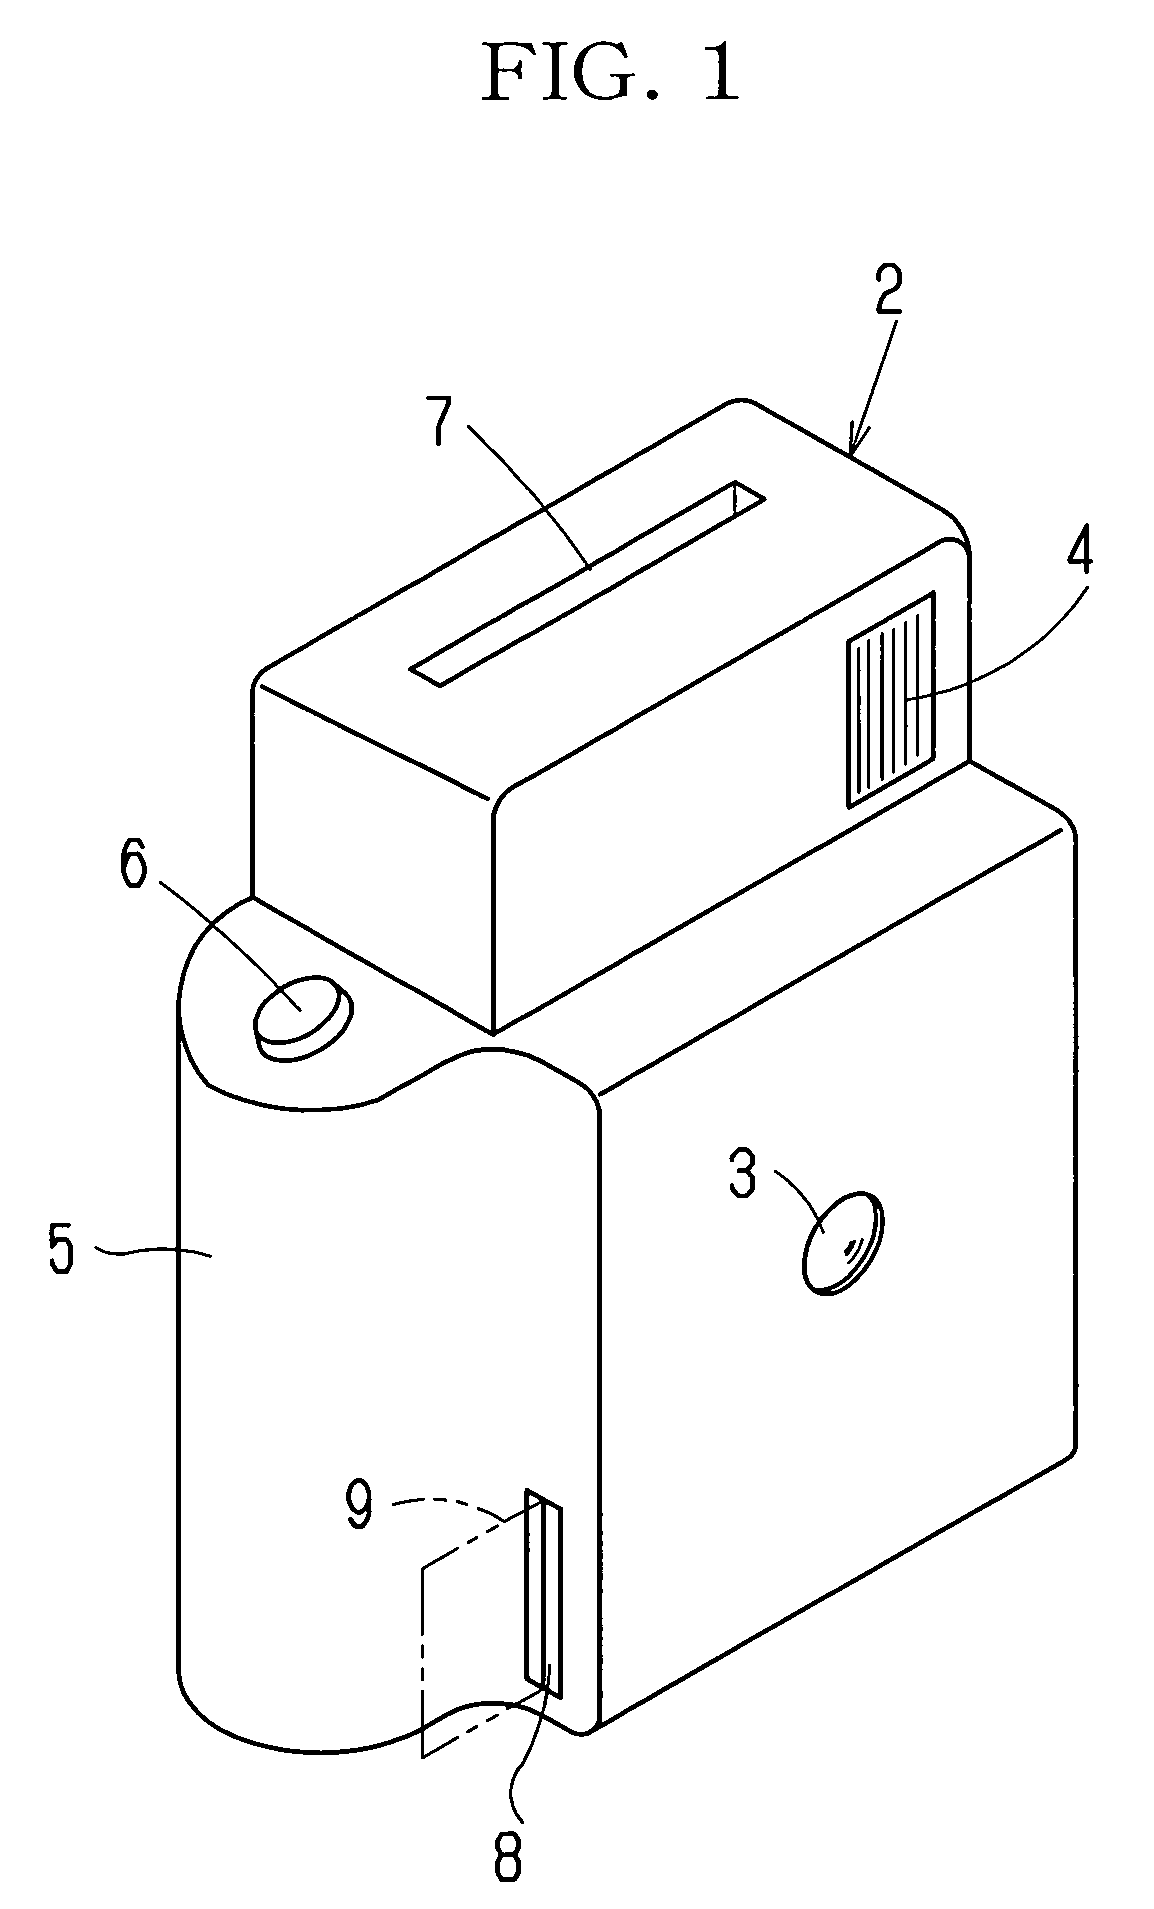 Instant printer, printing method for using the same, combination printer/electronic still camera system